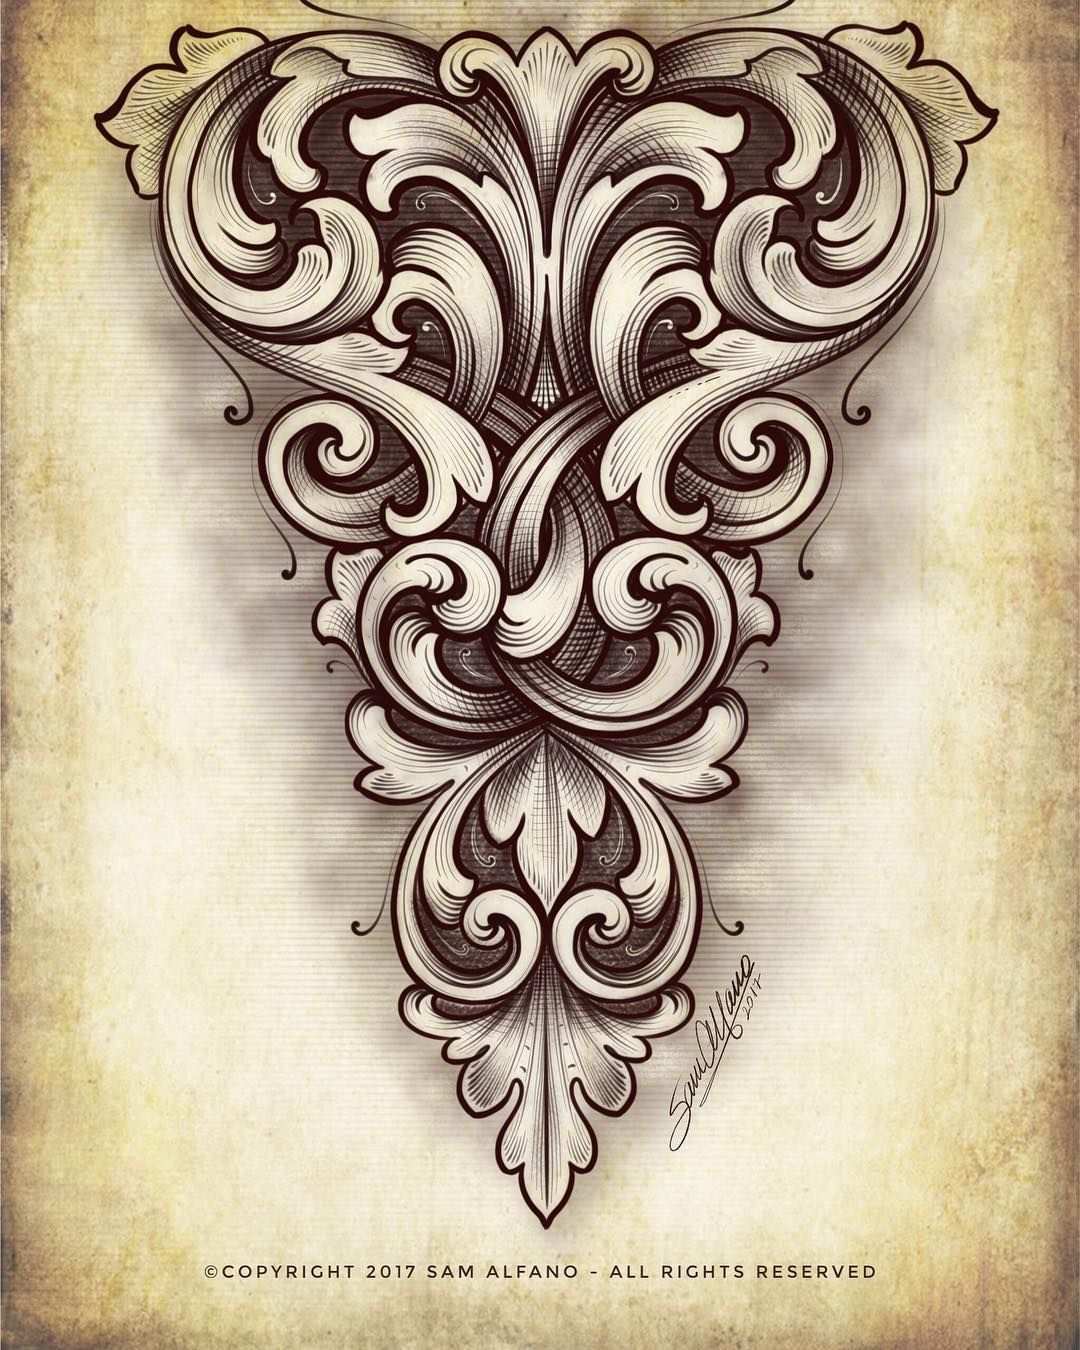 1 502 Likes 15 Comments Sam Alfano Master Engraver On Instagram Intertwined Scrolls Thanks For Follo Filigree Tattoo Wood Tattoo Carving Designs